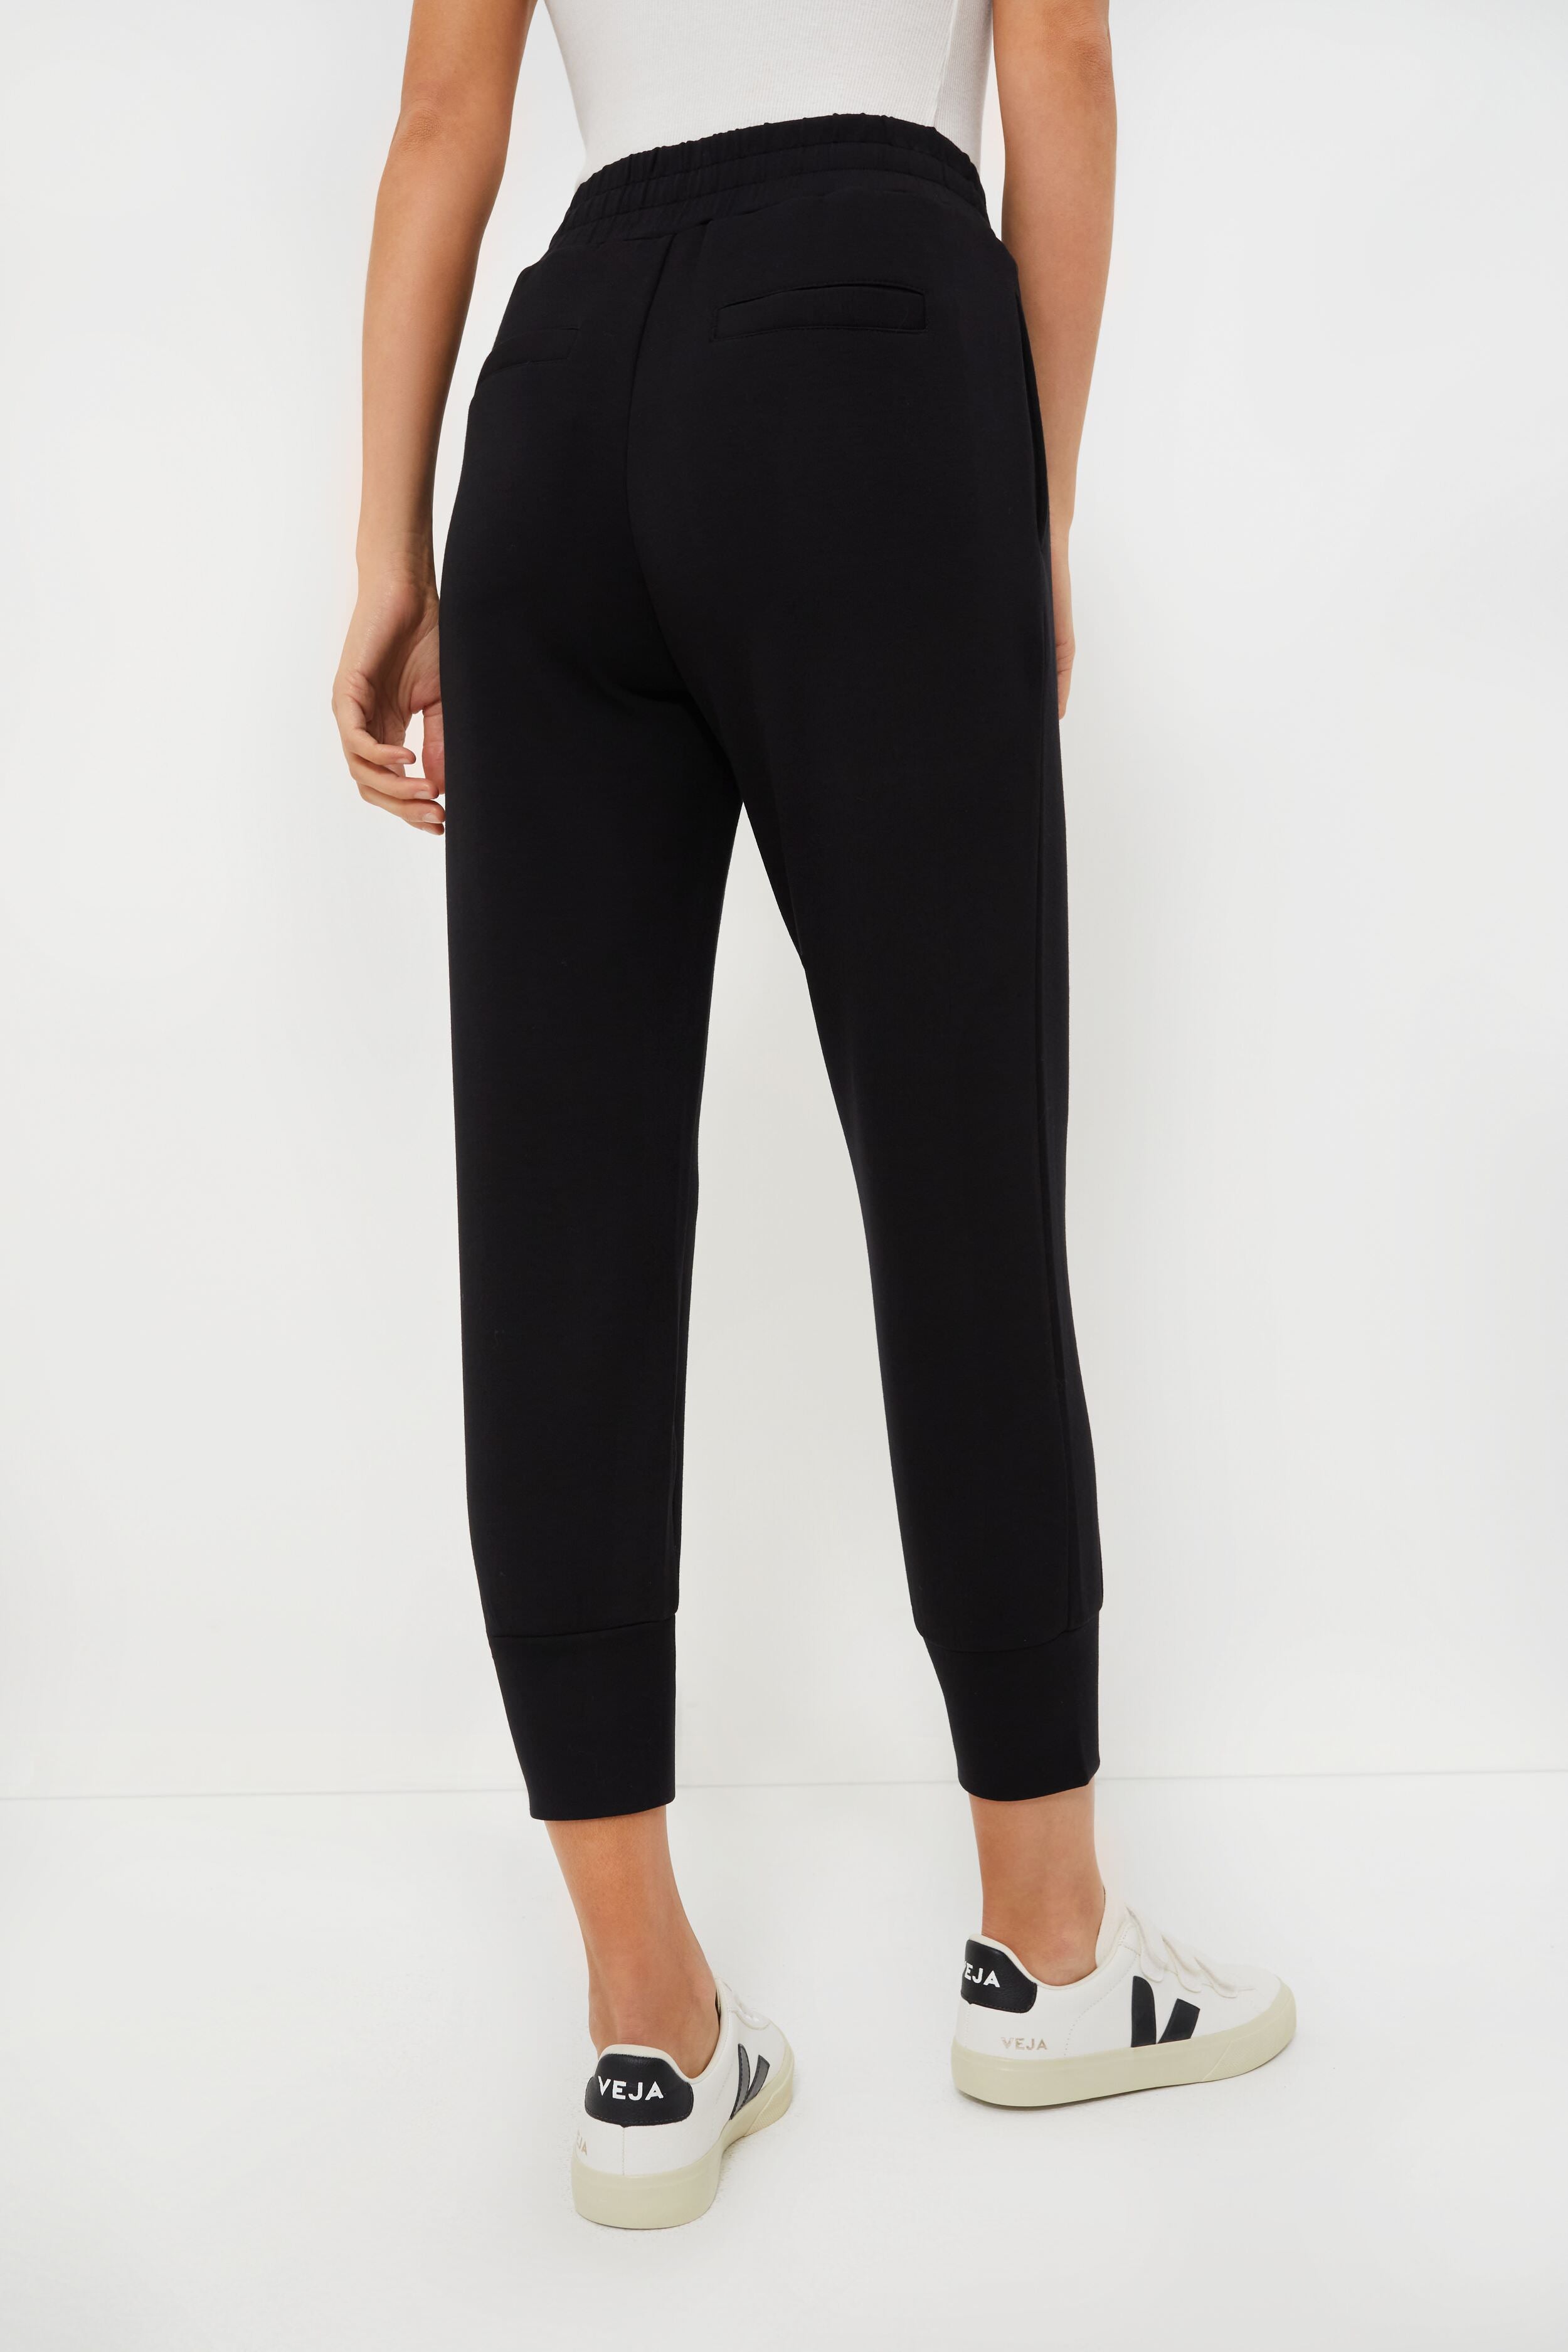 Varley  Slim Cuff Pant Black - Tryst Boutique